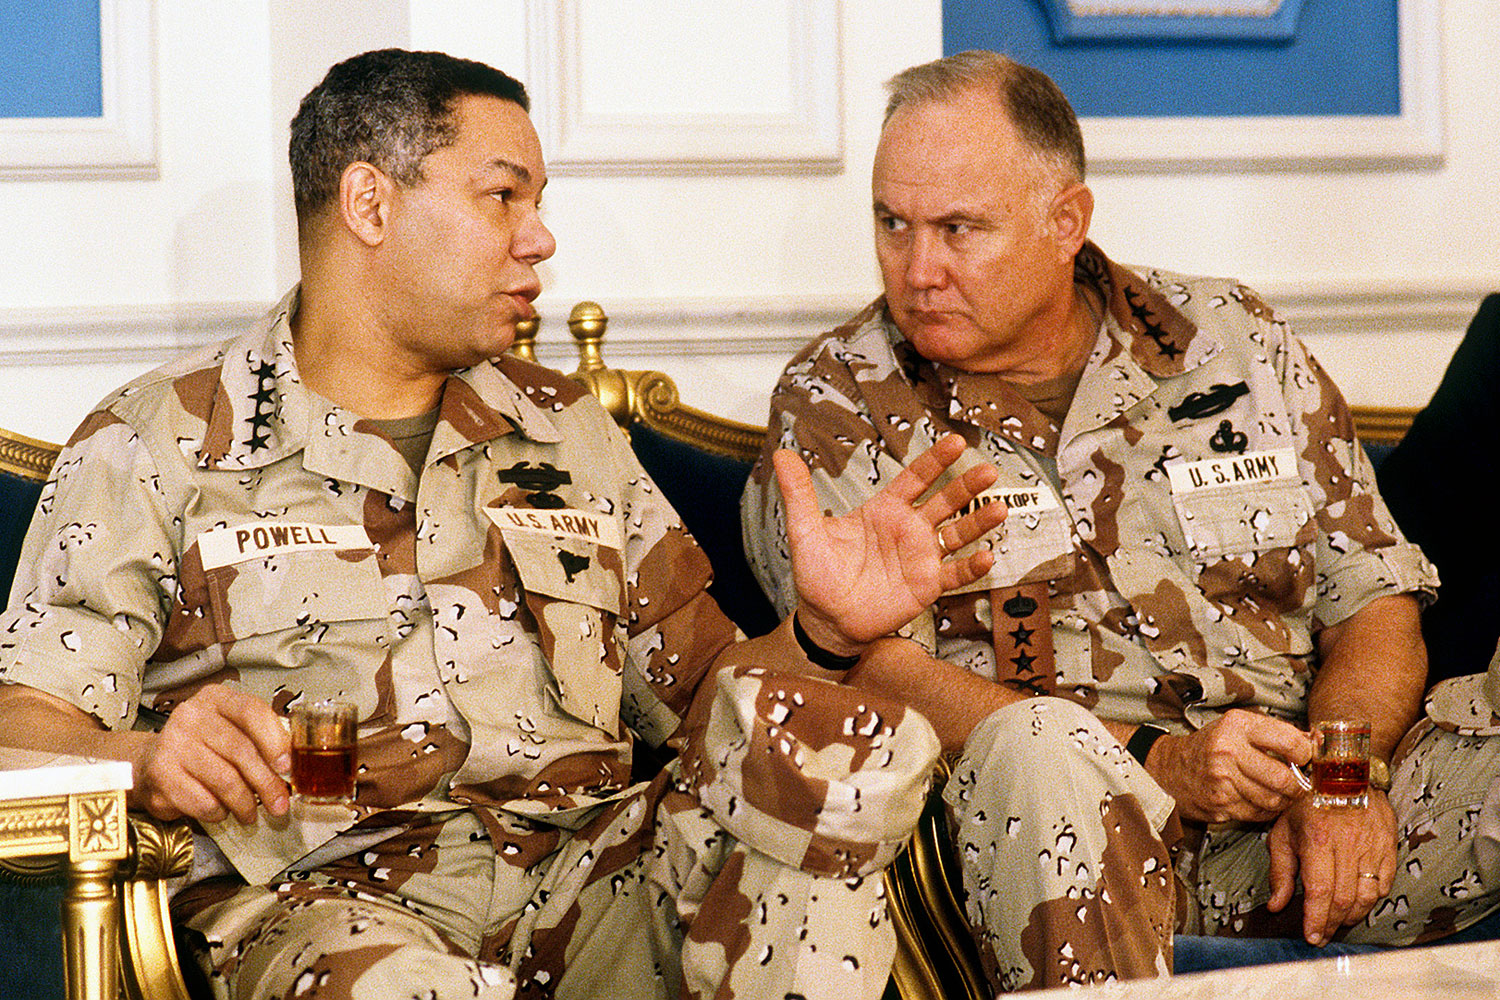 Starting in 1989, Gen. Colin Powell, left, served as the first black chairman of the Joint Chiefs of Staff. In 2001 he made history again as the first black U.S. Secretary of State. (DoD photo)